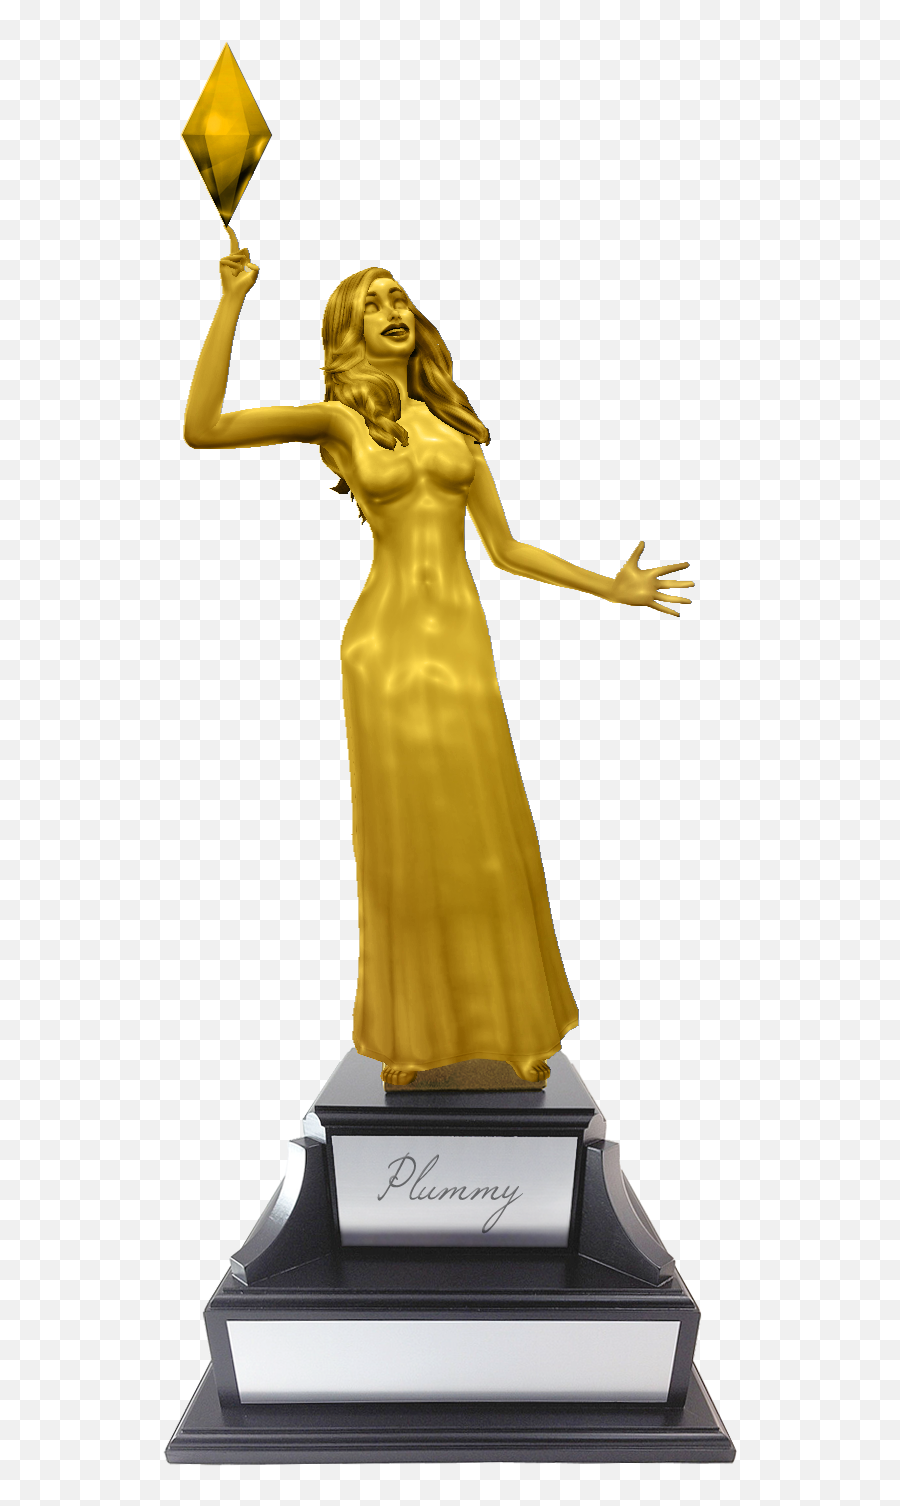 Plumbob Pictures Challenge U2014 The Sims Forums - Plumbob Statue Sims 4 Png,Plumbob Png